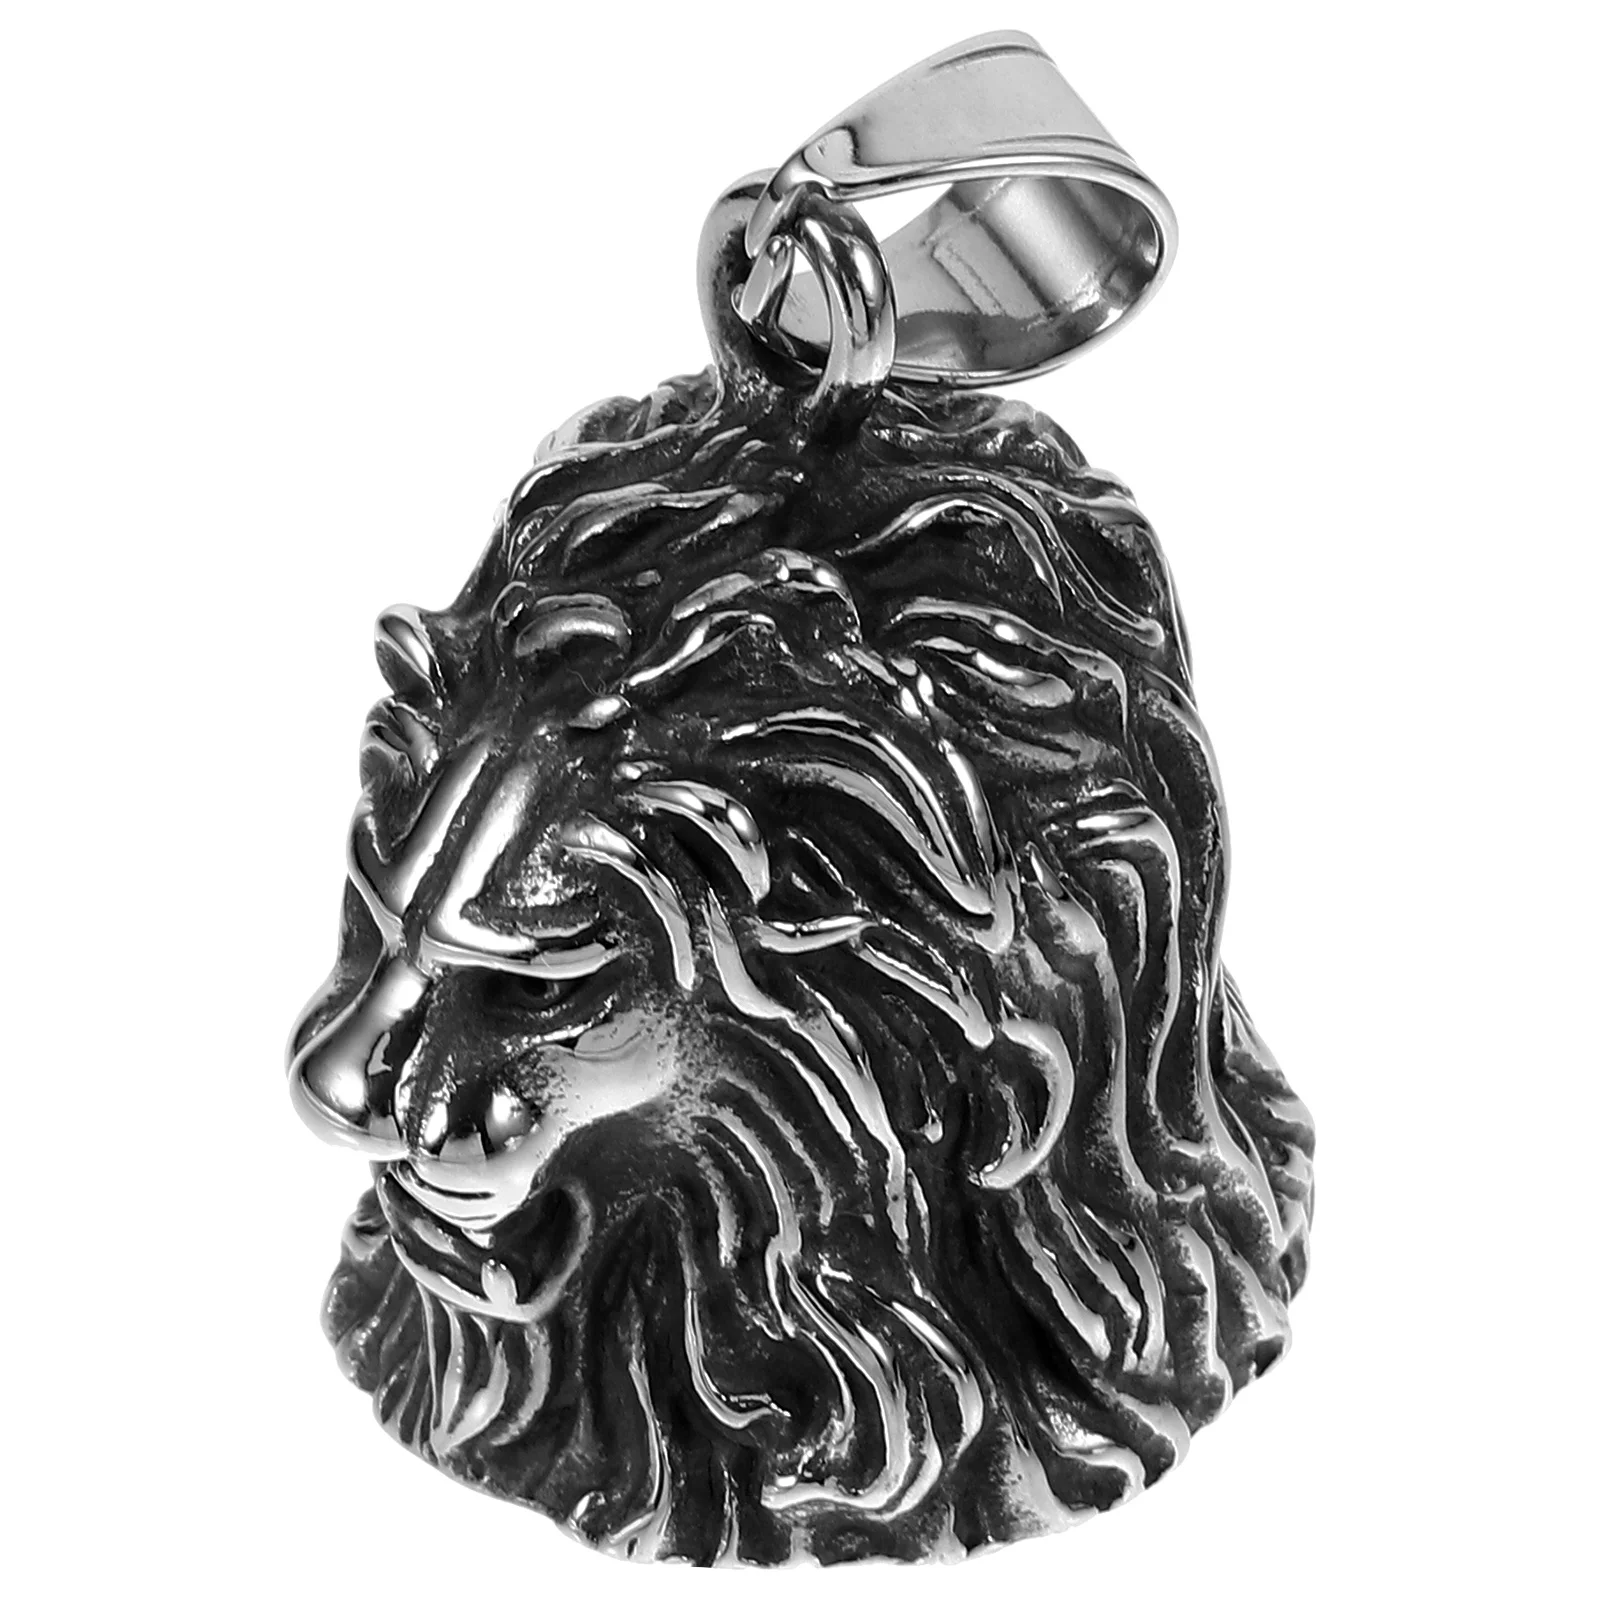 

Lion Charms Keychain Viking Motorcycle Bell Bells Head Pendant Animal Heads Car Decor